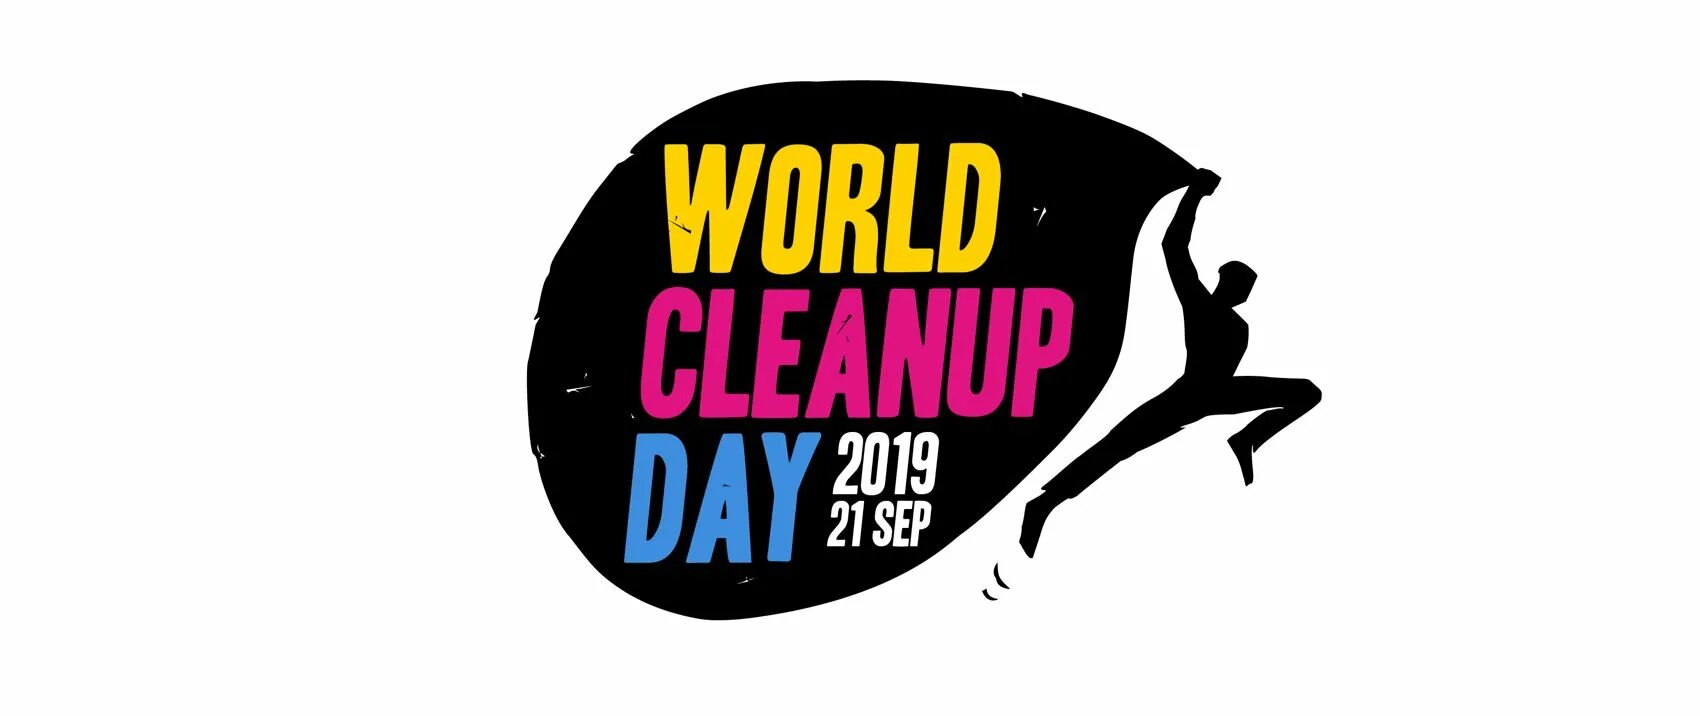 Cleaning up day. Clean up Day. World Cleanup Day. International clean-up Day рисунок. Cleanworld эмблема вектор.